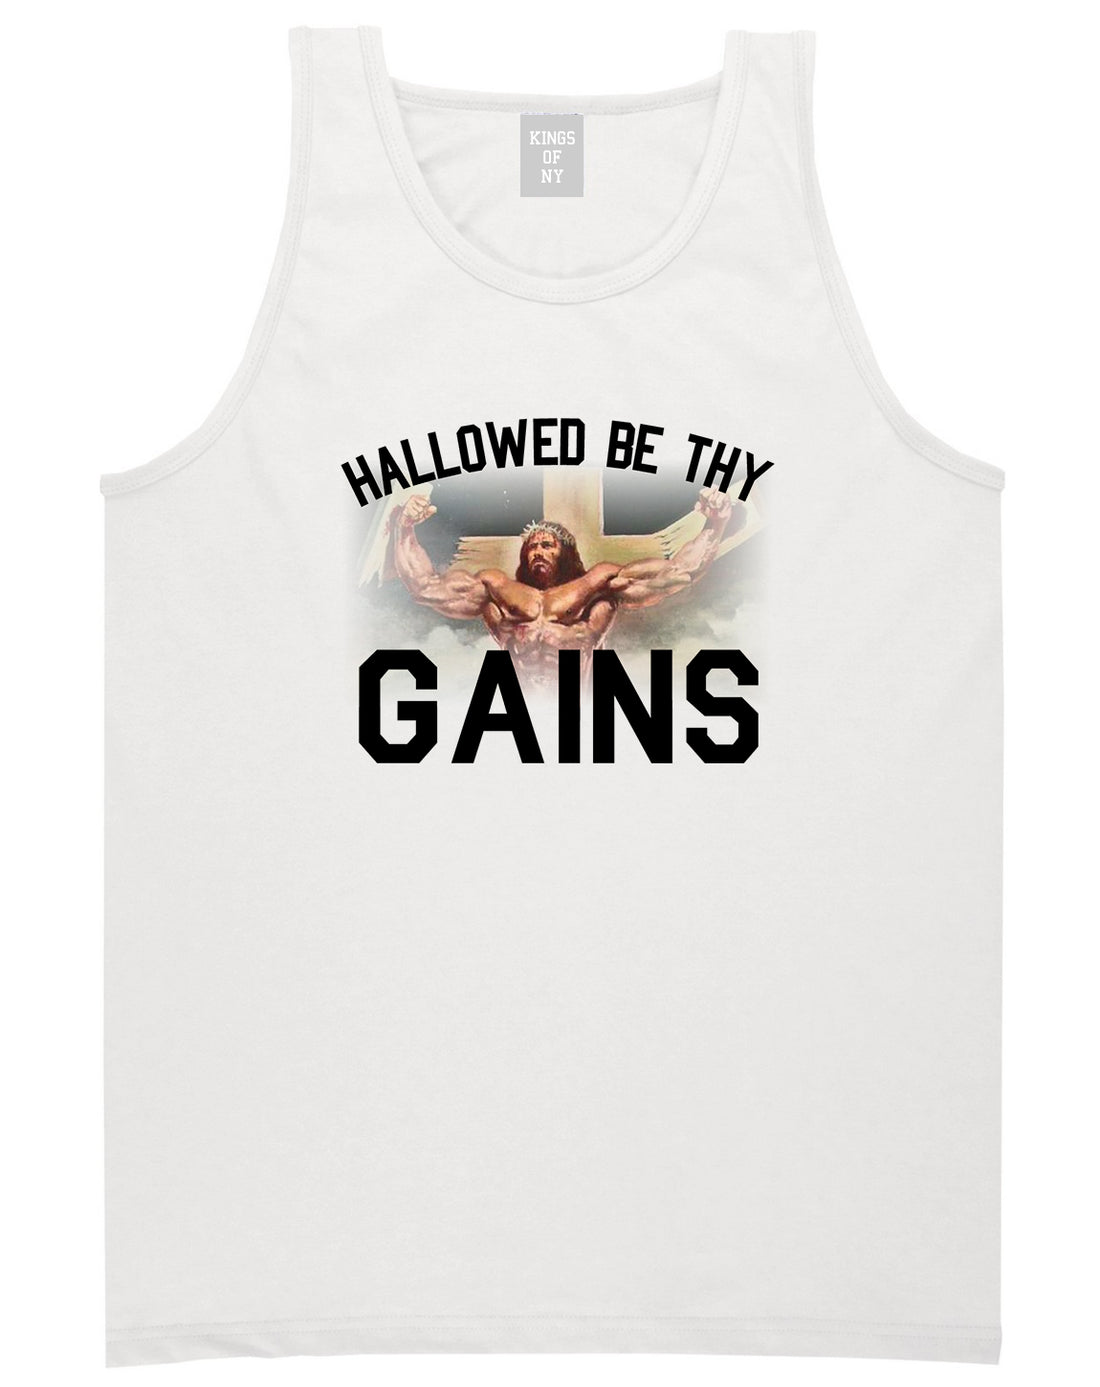 Hallowed Be Thy Gains Jesus Work Out Mens Tank Top Shirt White